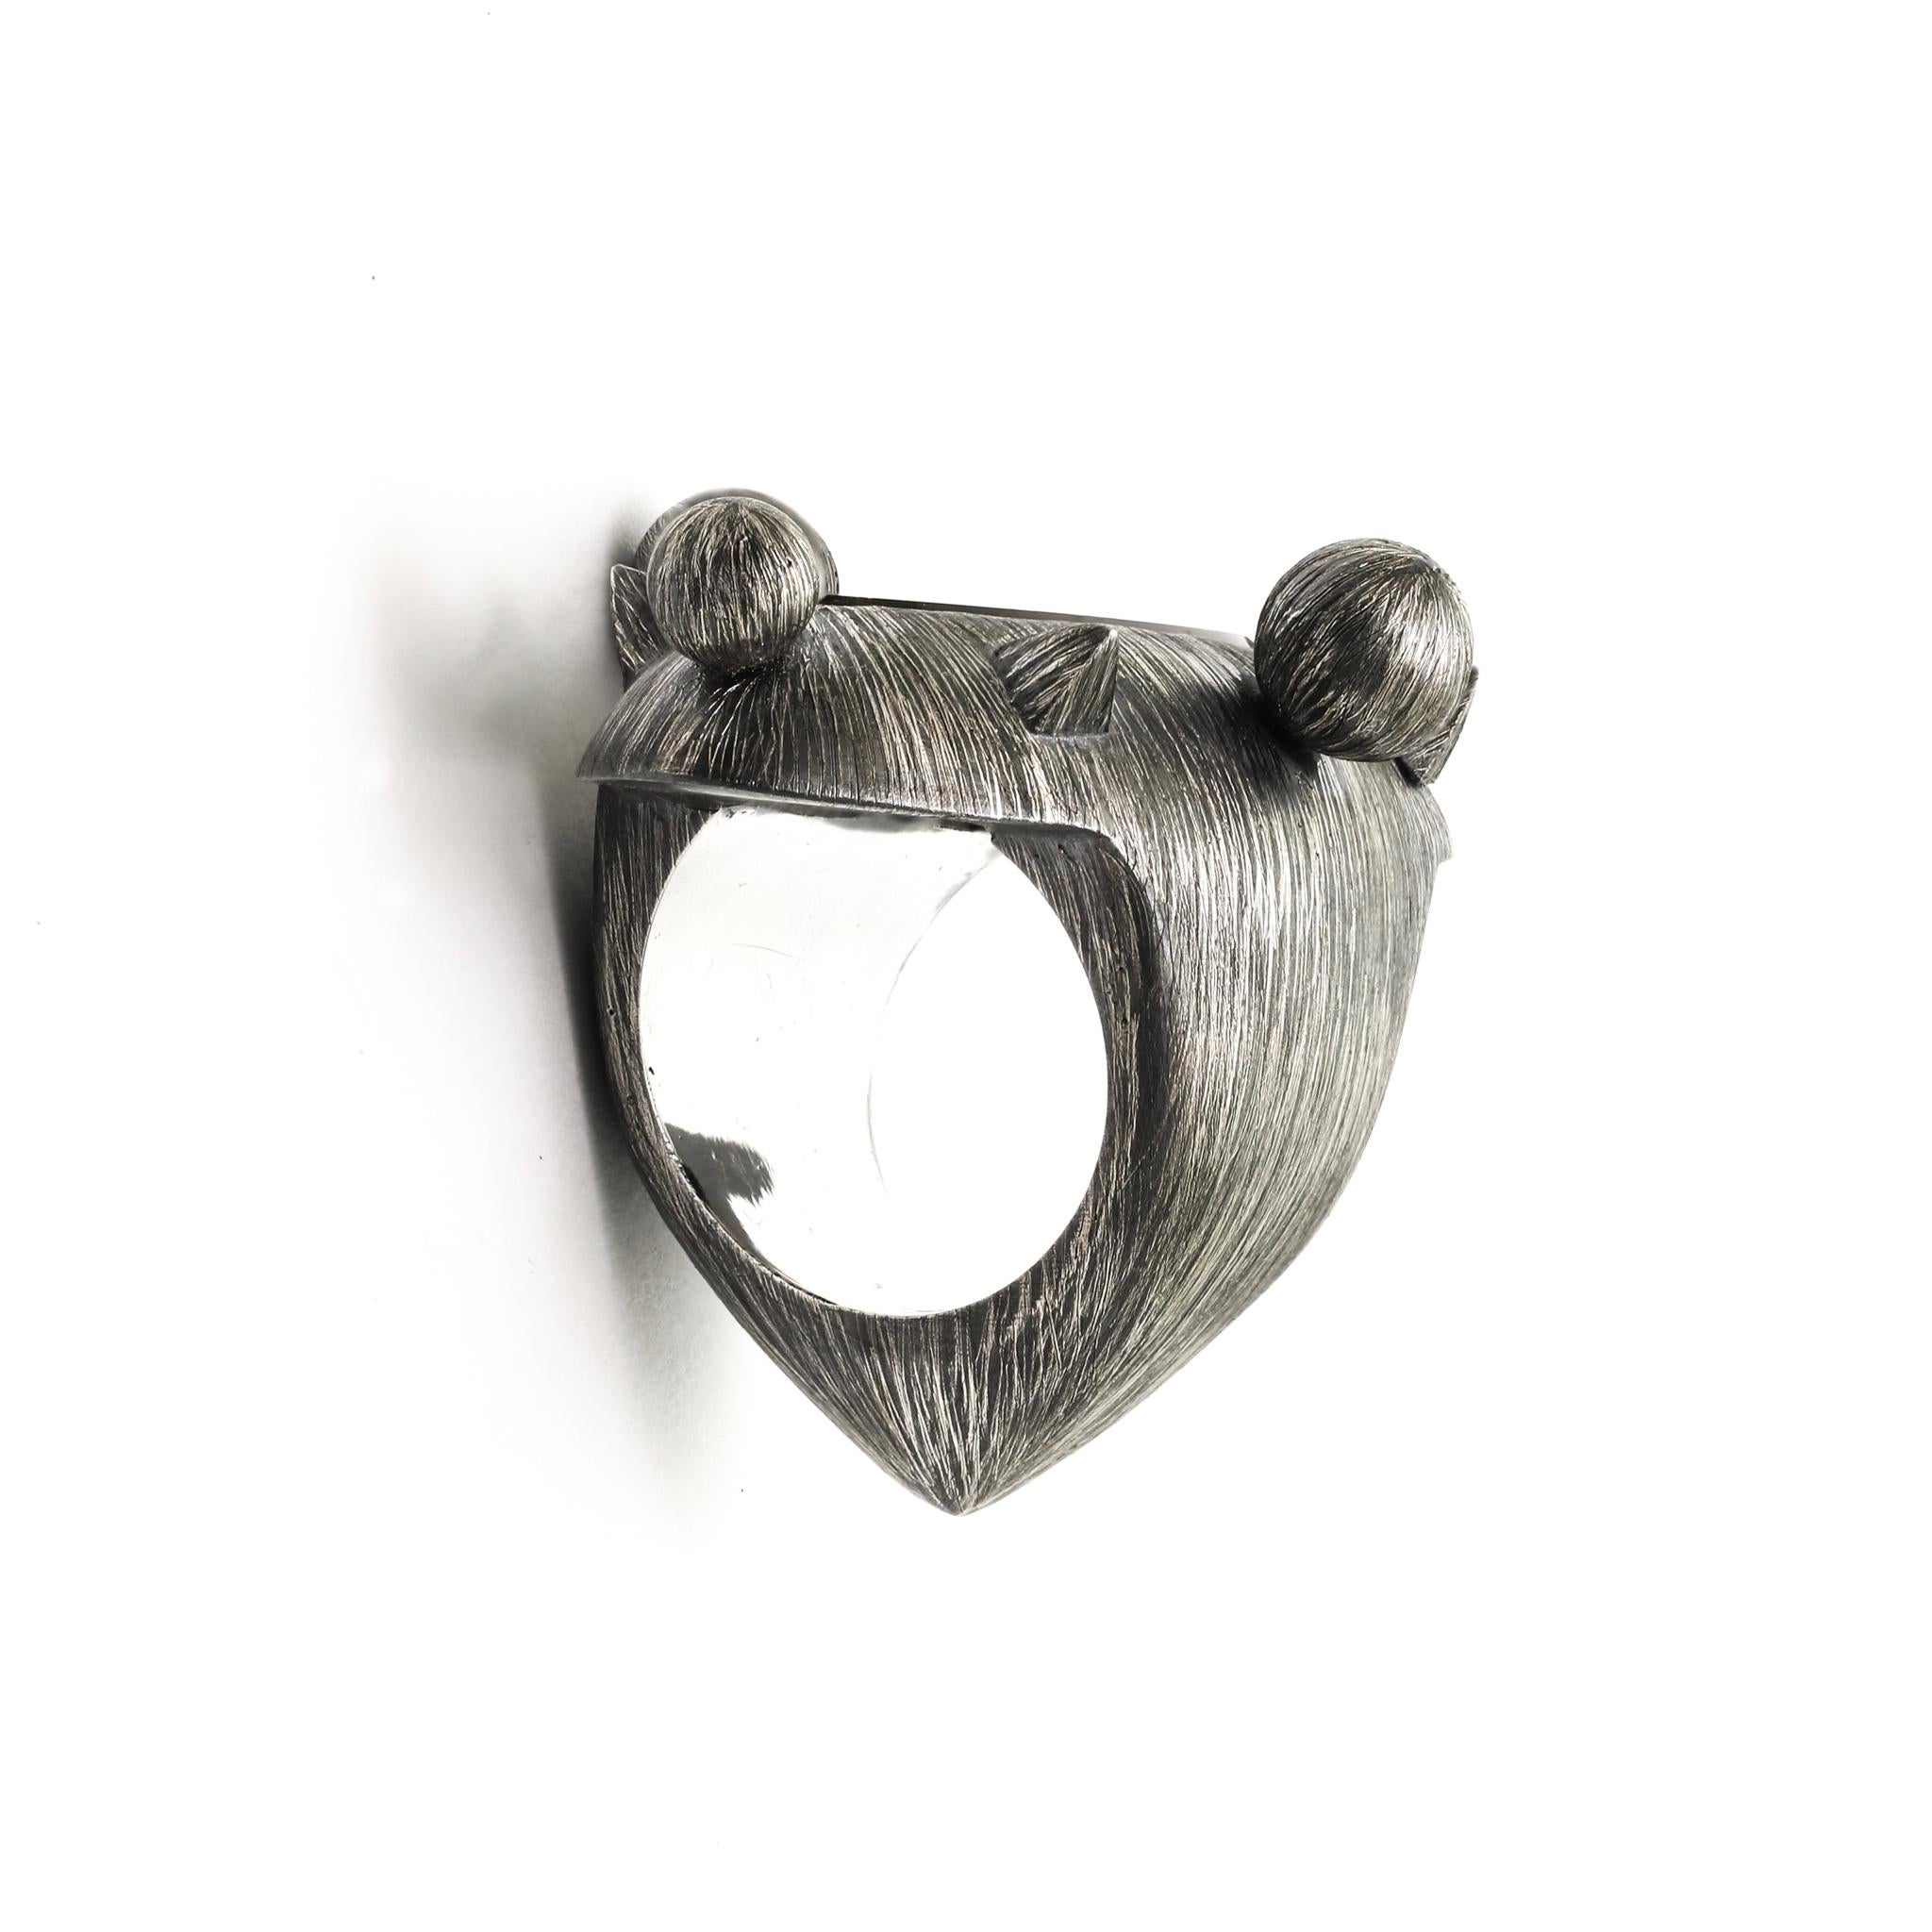 Hand-Crafted Constellation Ring, Etched Sterling Silver & Smoky Quartz